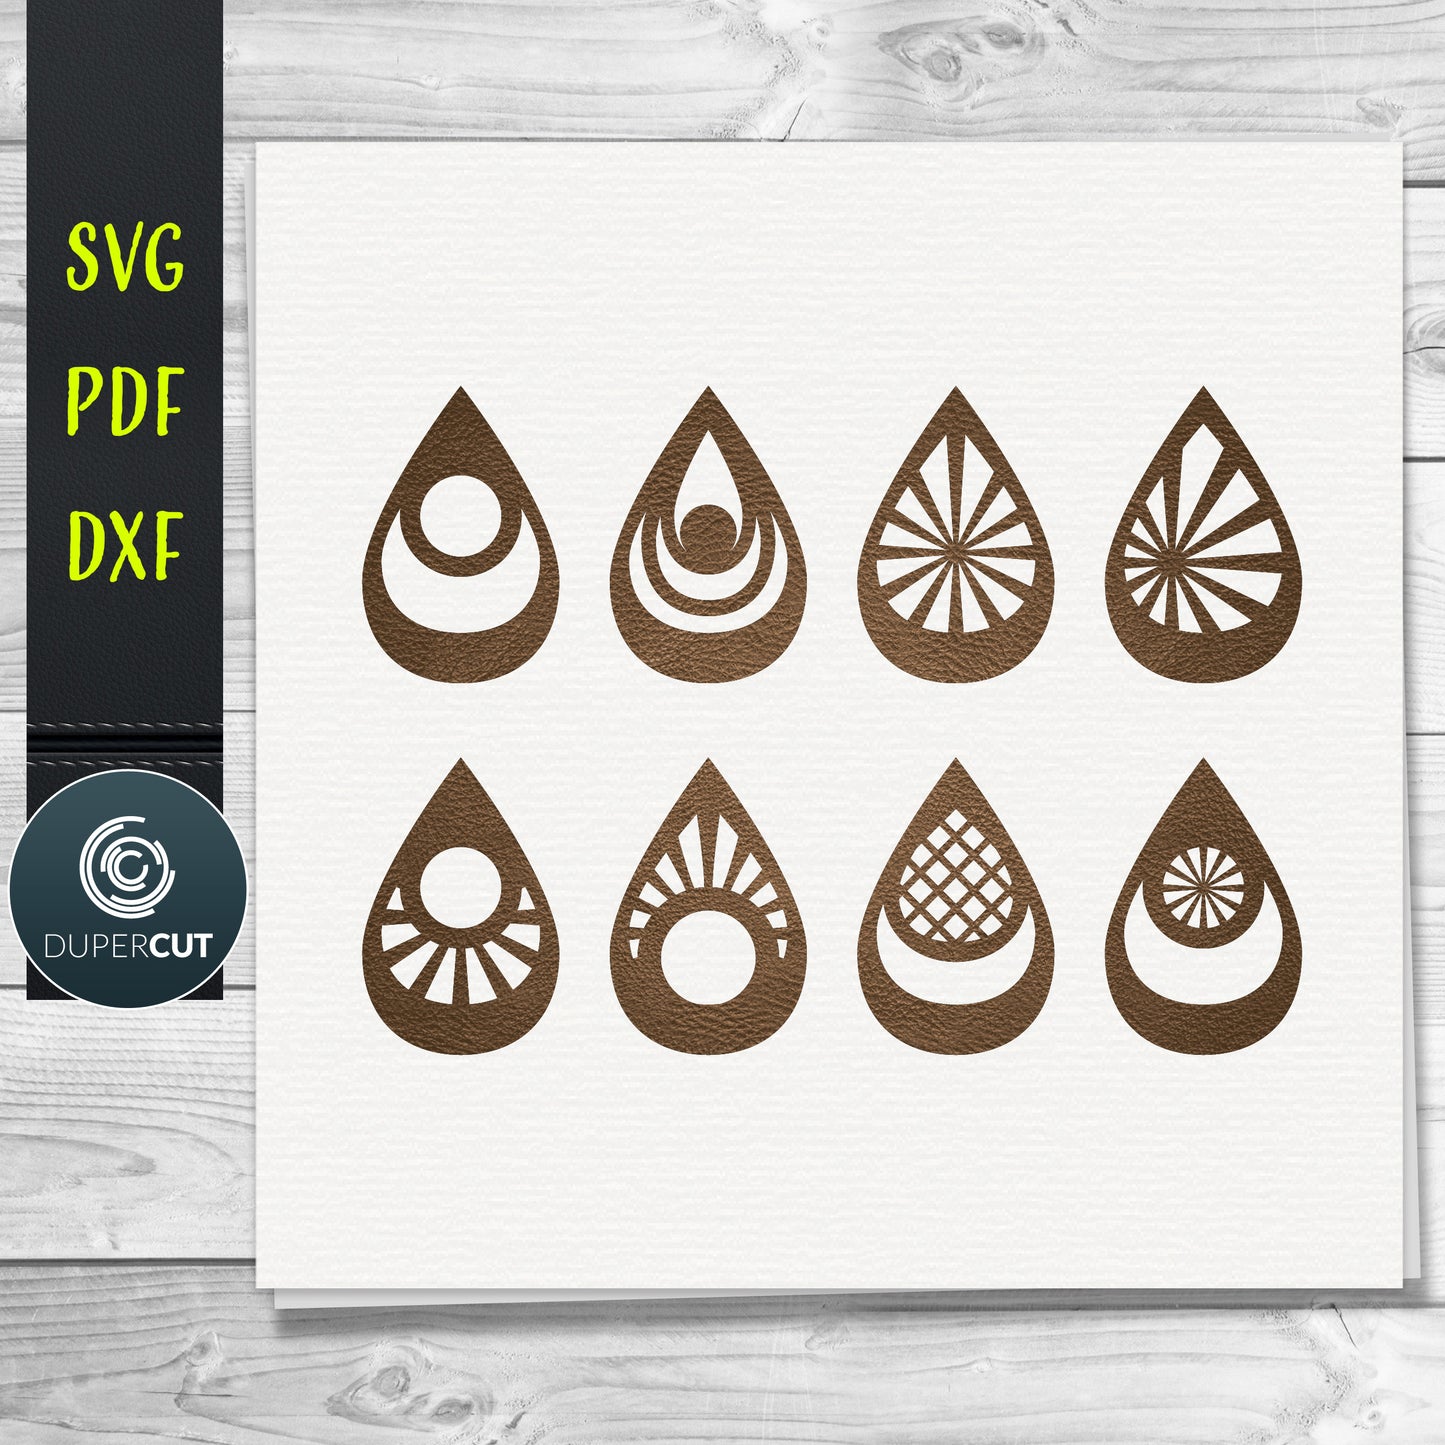 DIY geometric Leather Earrings SVG PDF DXF vector files. Jewellery making template for laser and cutting machines - Glowforge, Cricut, Silhouette Cameo.